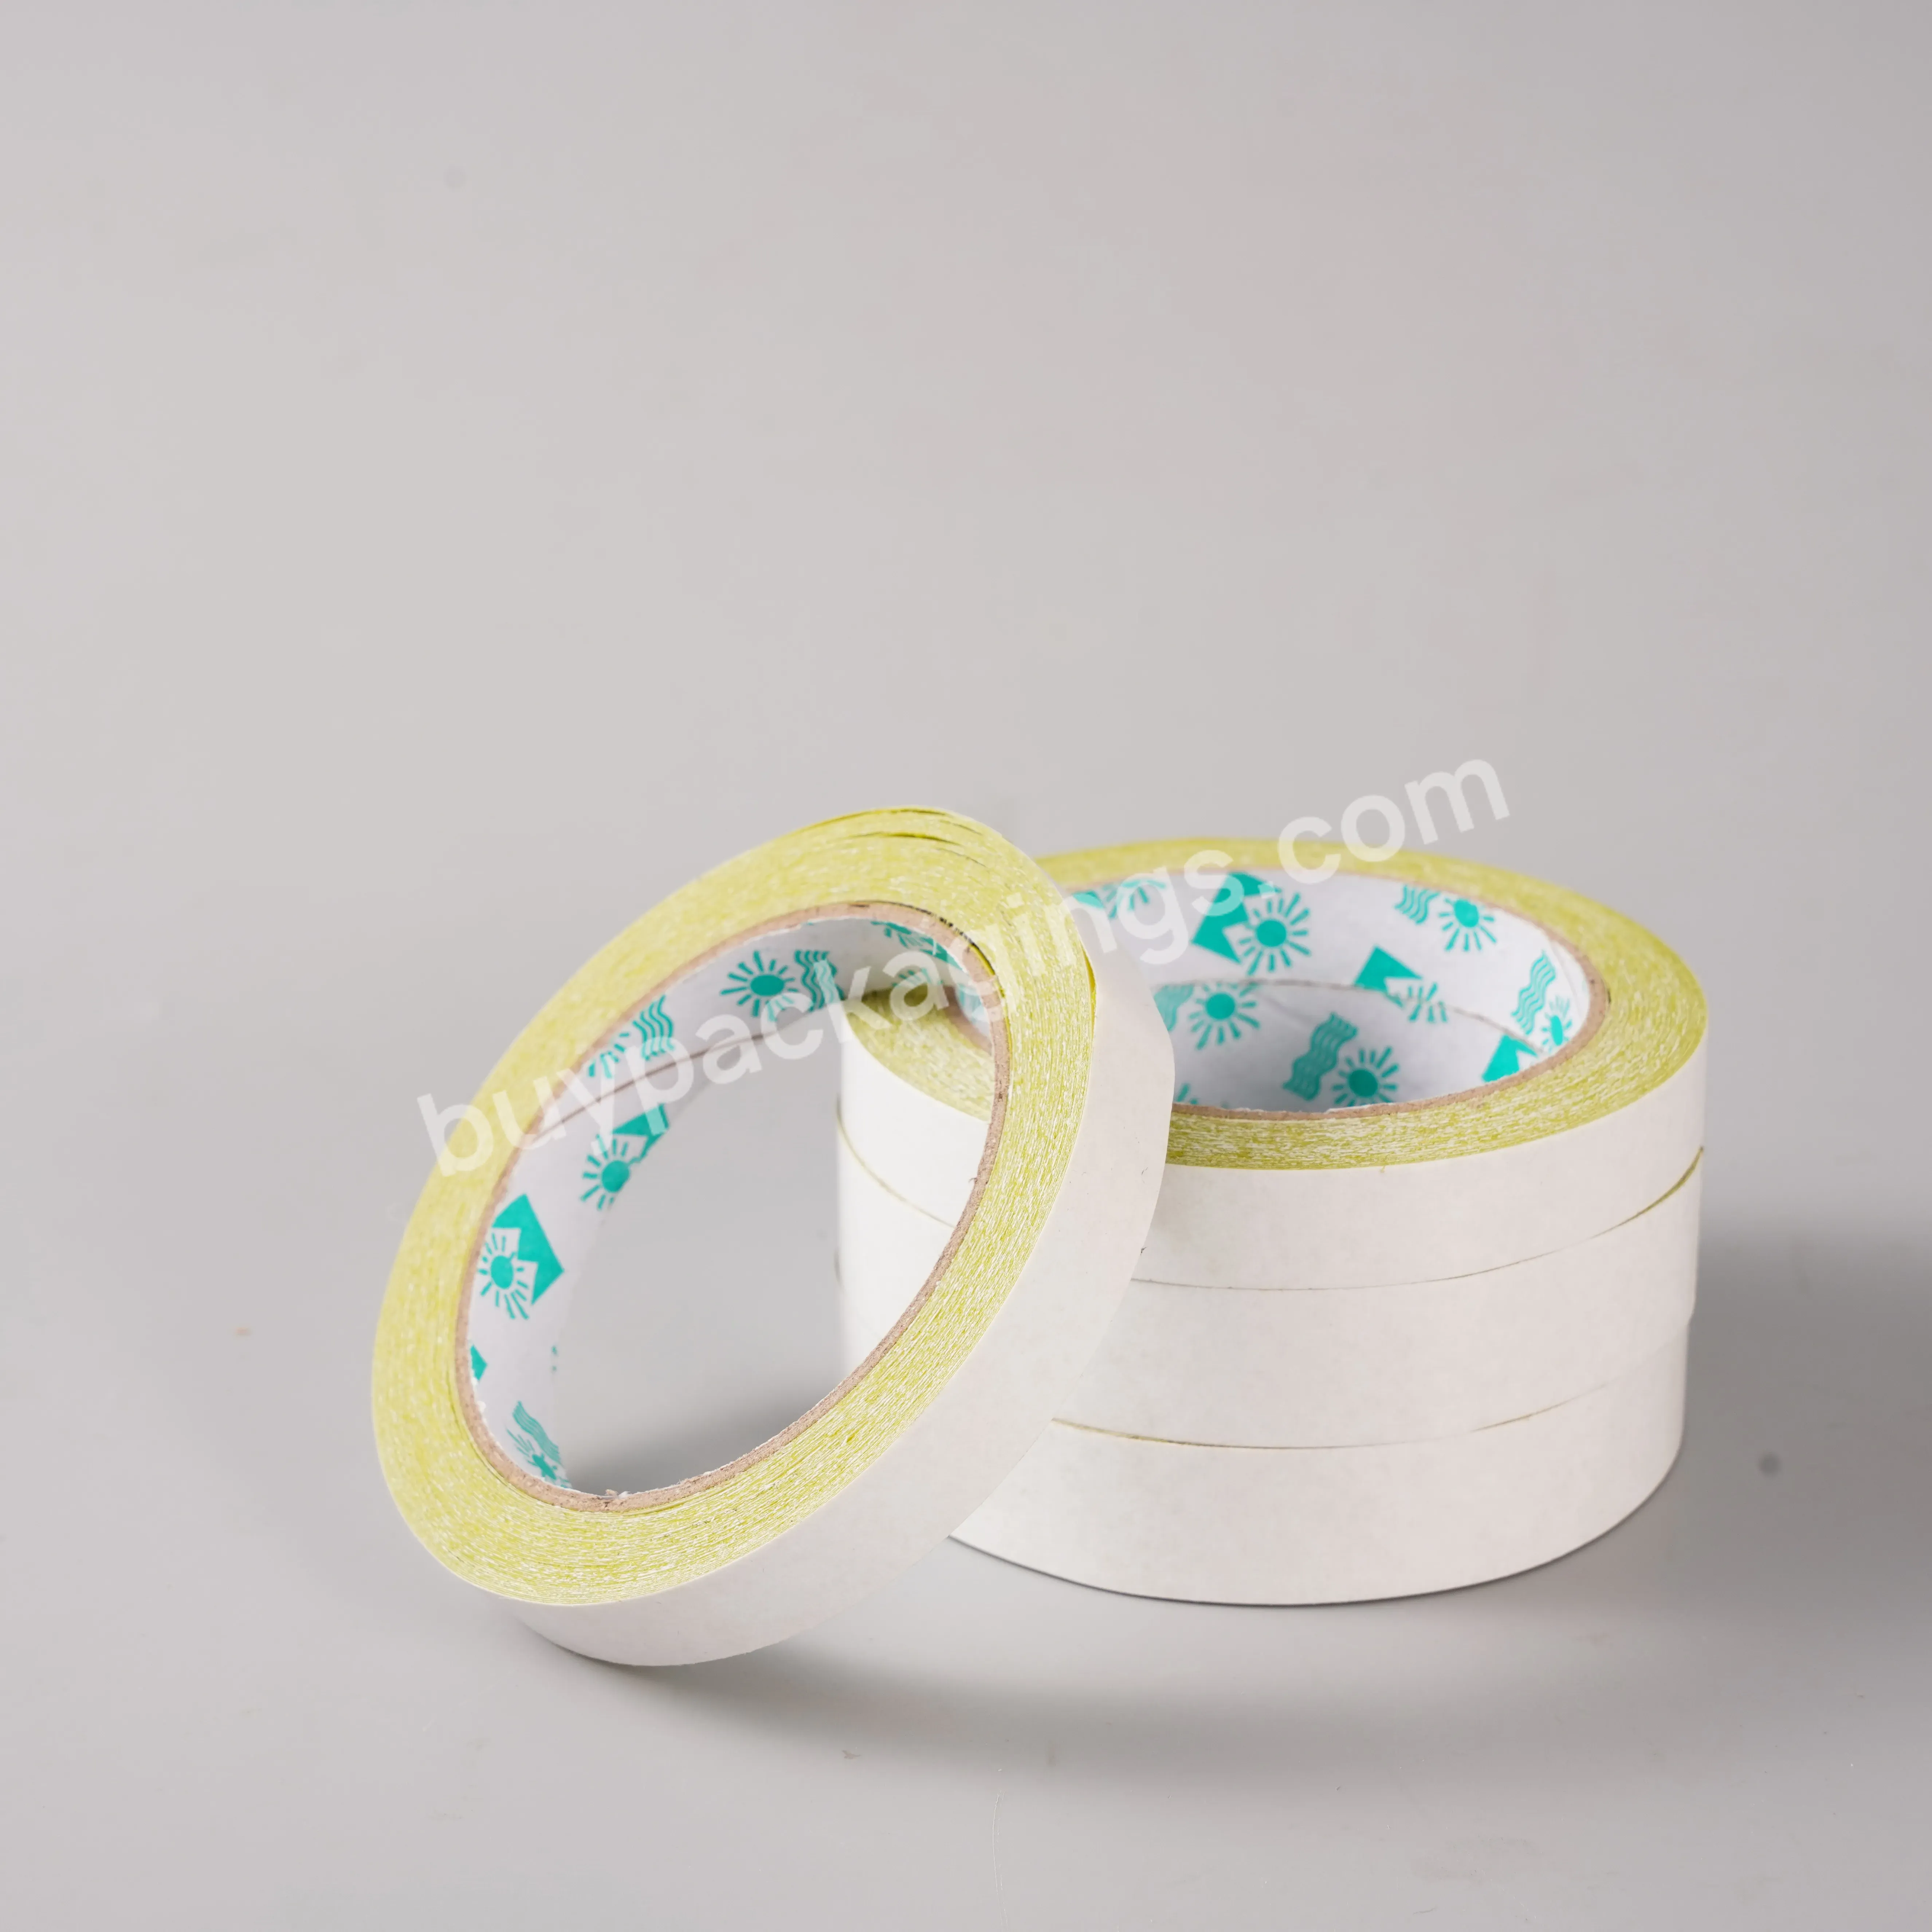 Hot Selling 20mm And 40mm Width Yellow Double-sided Tape For Attaching Goods - Buy Double Sided Tape,Tape Wholesale,Free Sample Self Adhesive Tape.